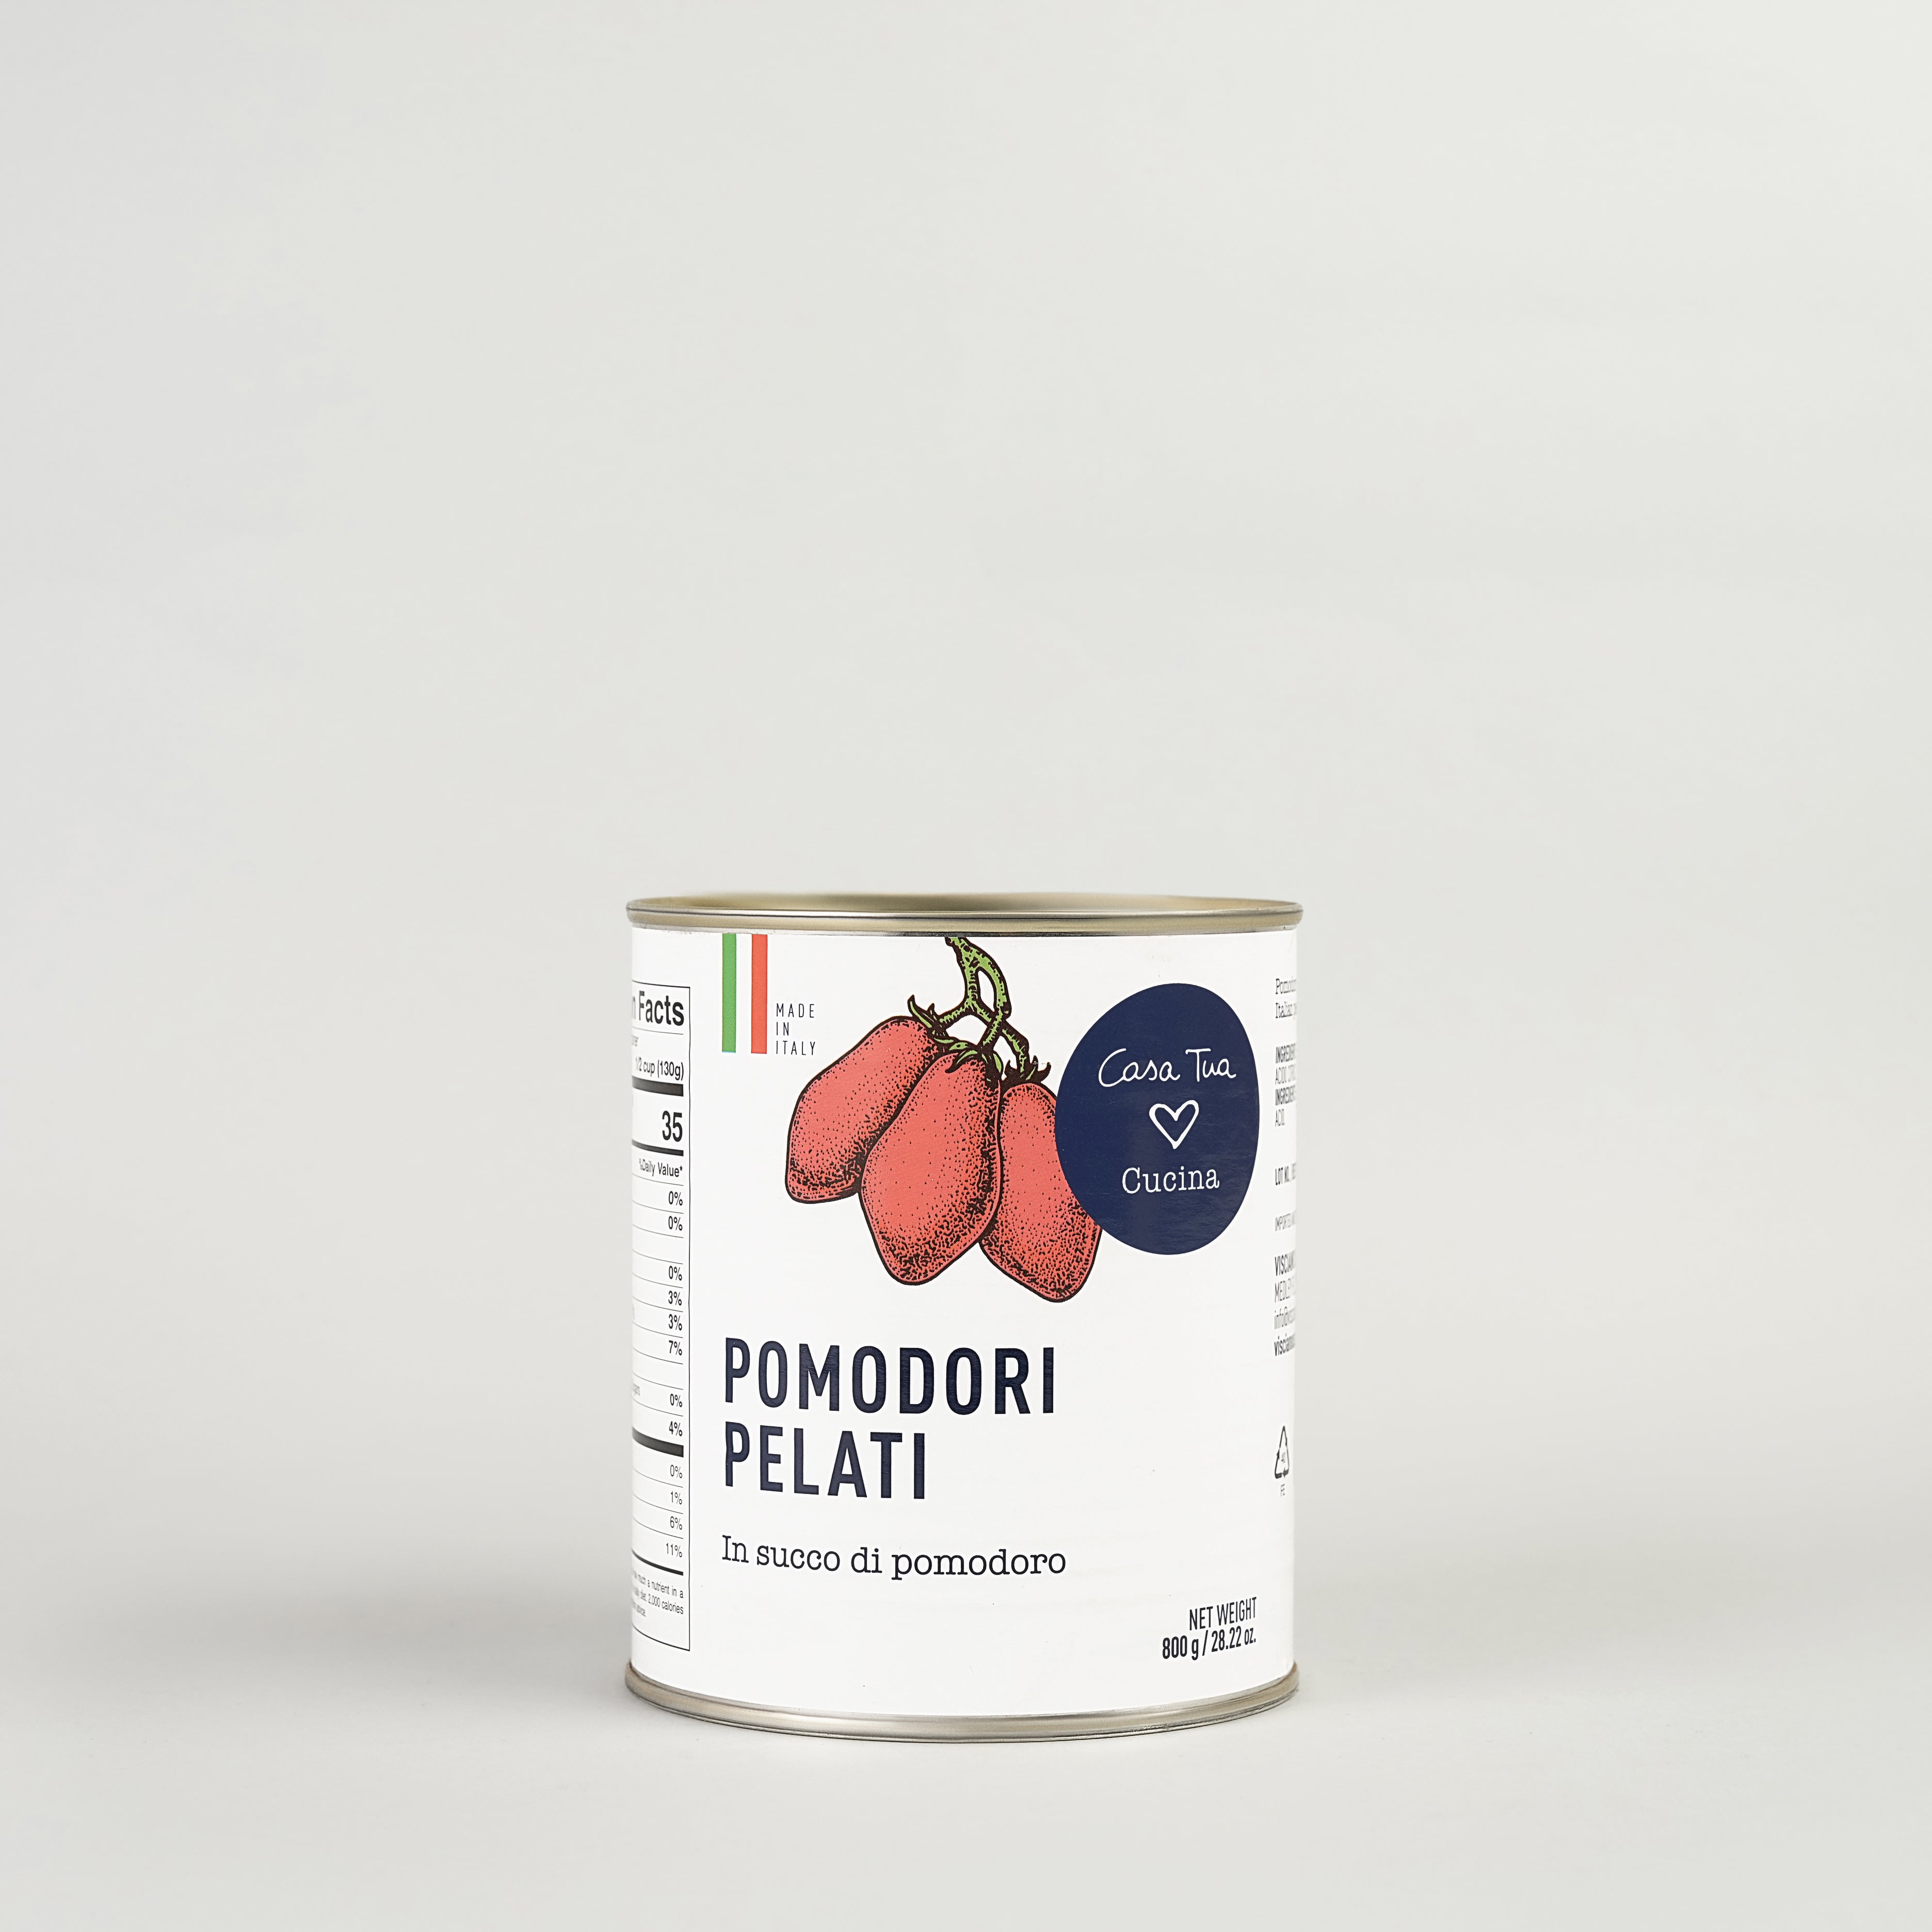 WHOLE PEELED TOMATOES WITH BASIL FROM APULIA 3kg